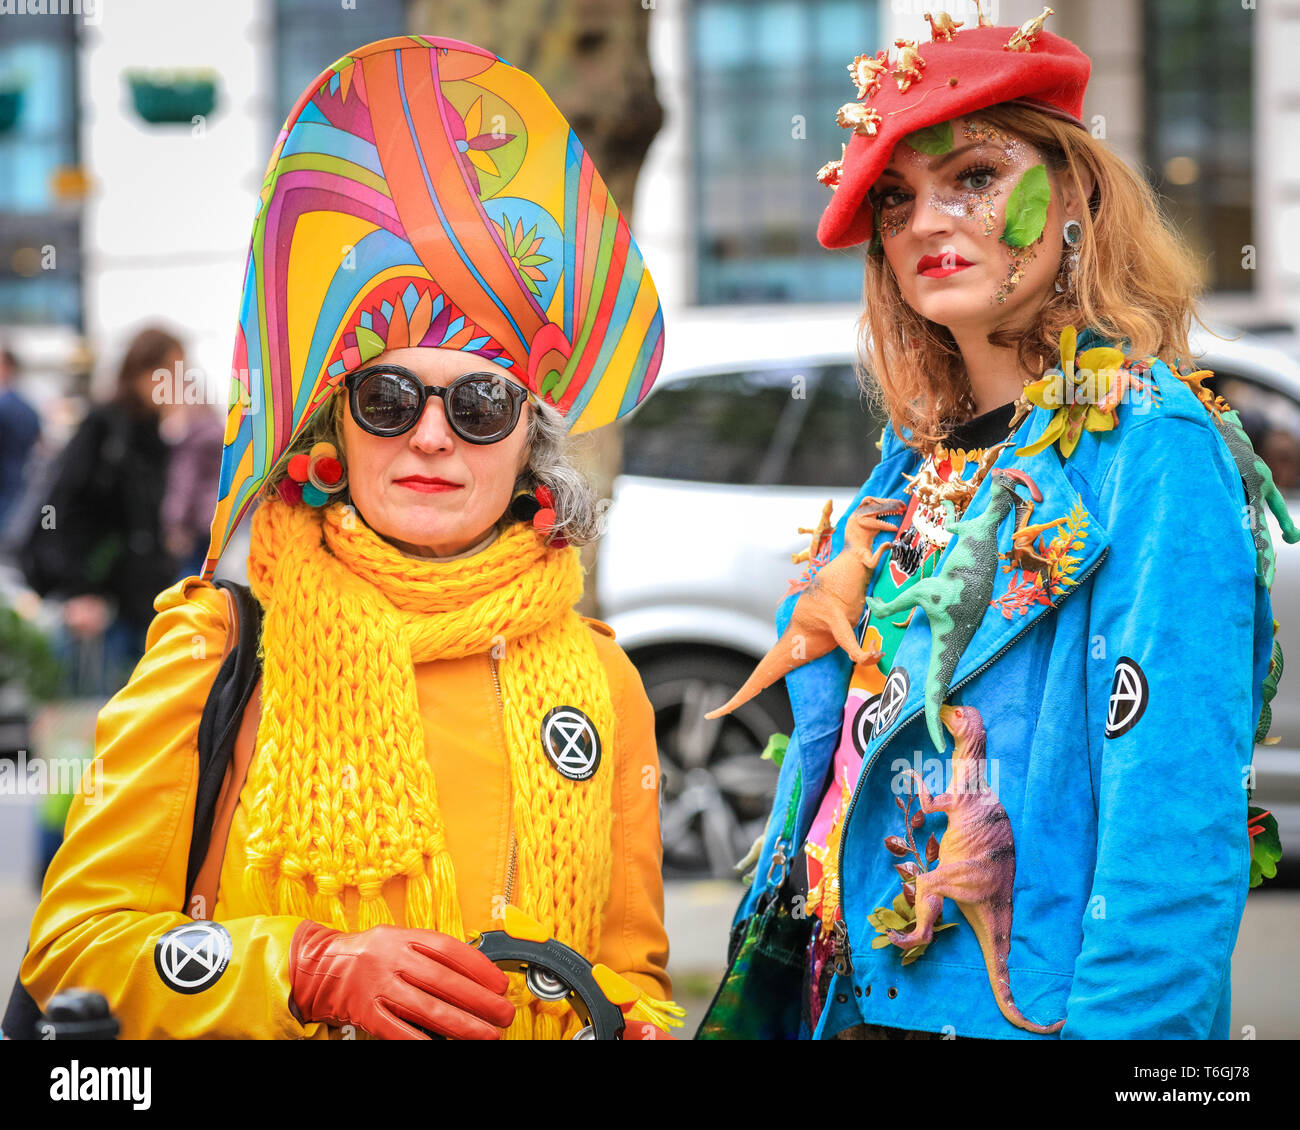 London, UK. 1st May, 2019. Protesters have turned up in fashionable, bright outfits. Extinction Rebellion have organised a 'Carnival of Chaos' outside the Brazilian Embasssy in central London. The protest is to highlight XR's 'solidarity with the people of Brazil, joining the fight to defend the planet's ecosystem' and is attended by several figures from the fashion industry. Credit: Imageplotter/Alamy Live News Stock Photo